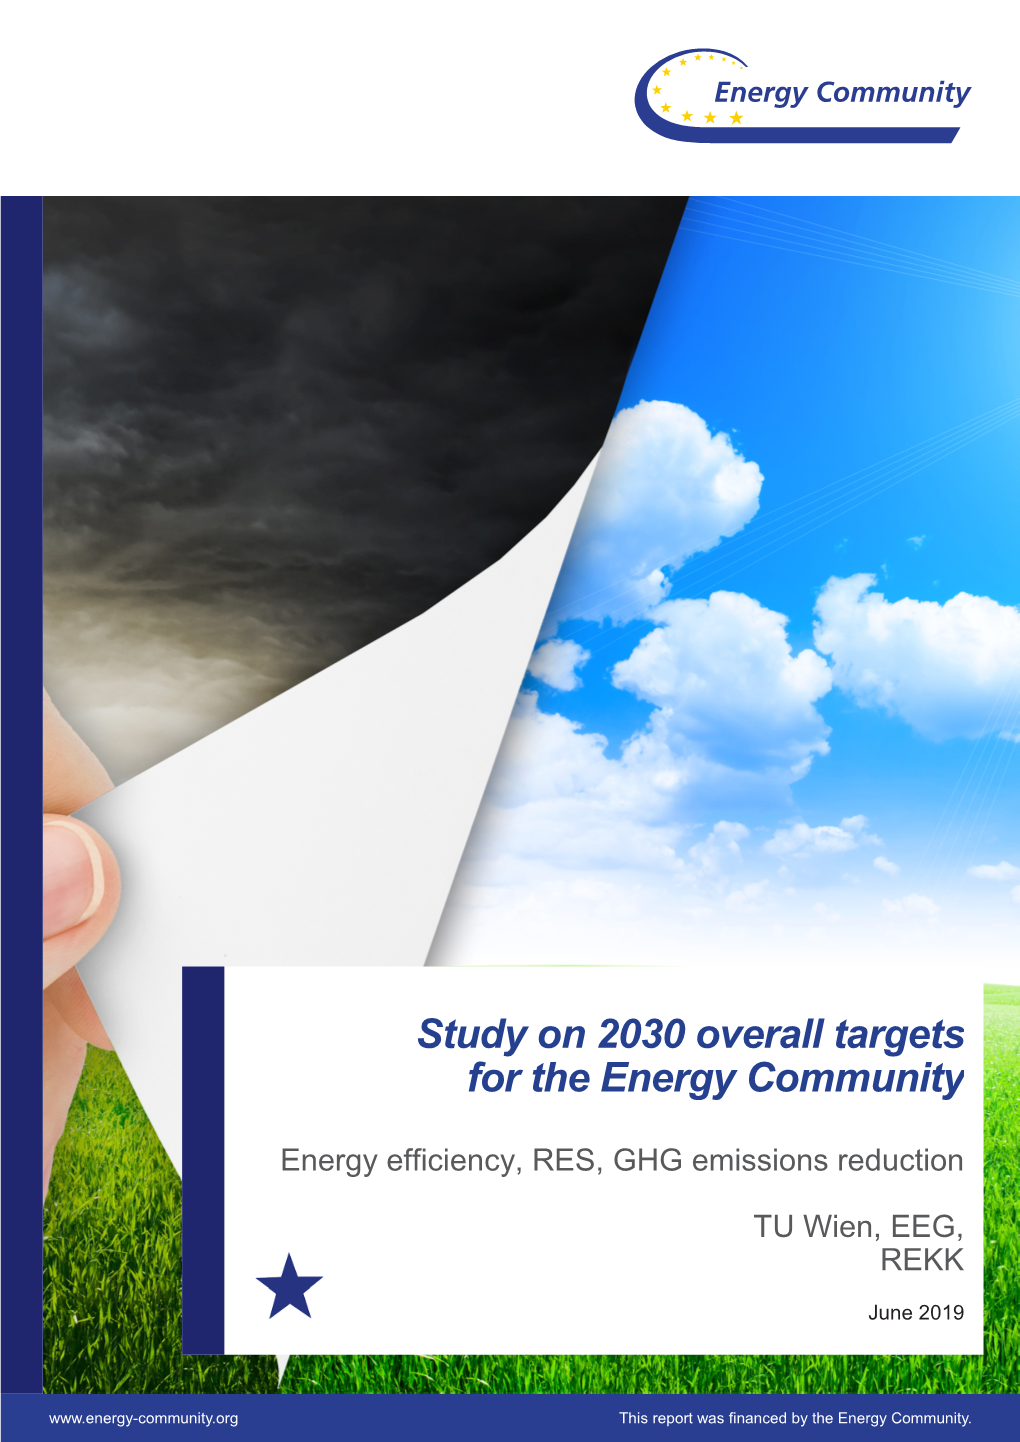 Study on 2030 Overall Targets for the Energy Community